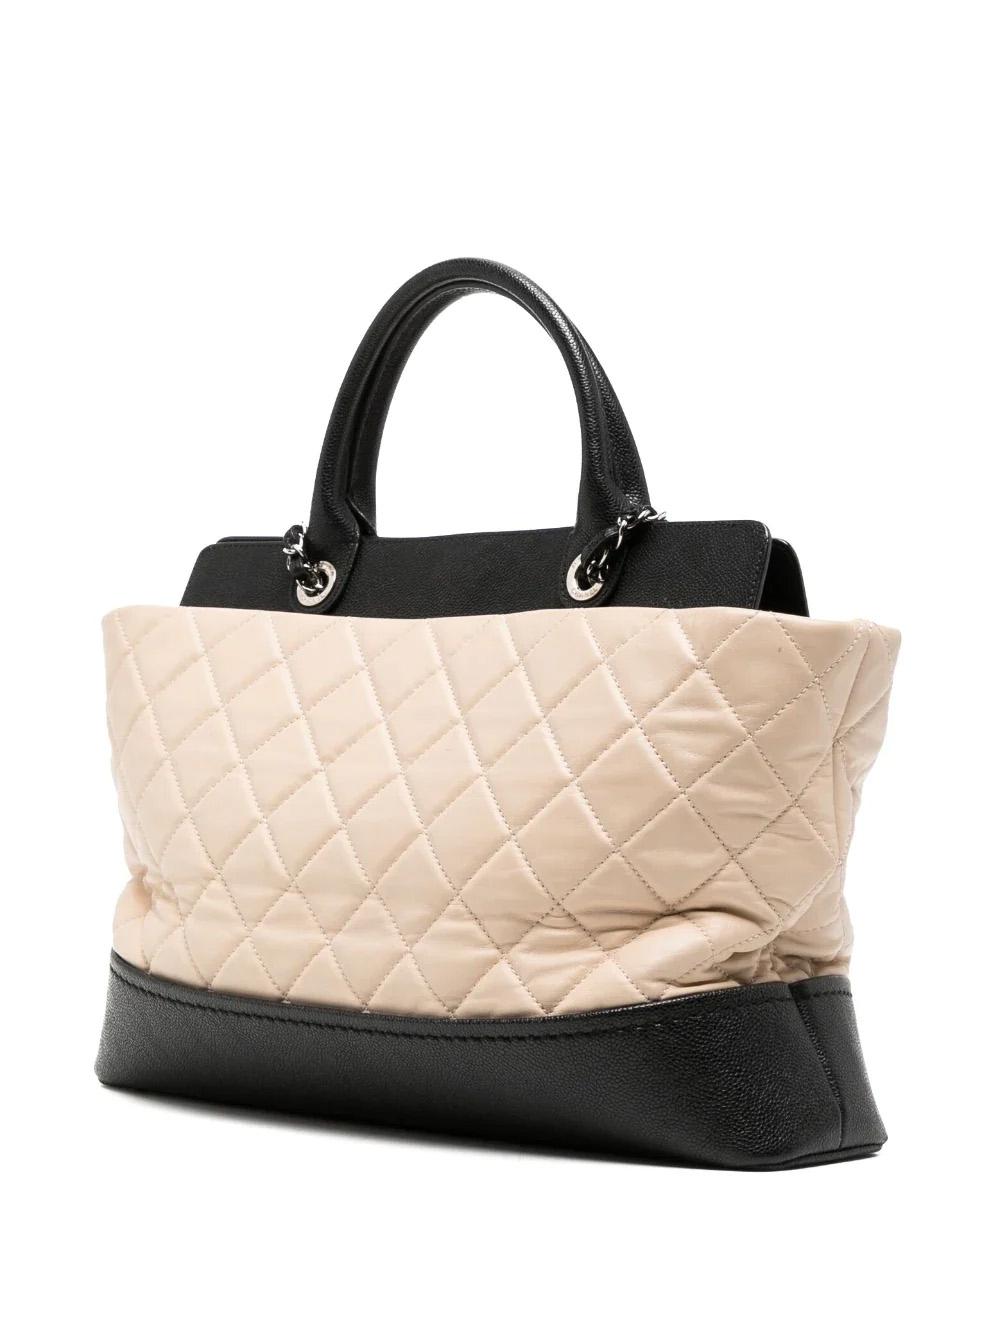 This Coco Shopping Tote is crafted from a combination of beige lambskin and black caviar leather. It features diamond quilting, a logo charm and two rolled top handles. Further, it offers two leather and chain-link shoulder straps and a signature